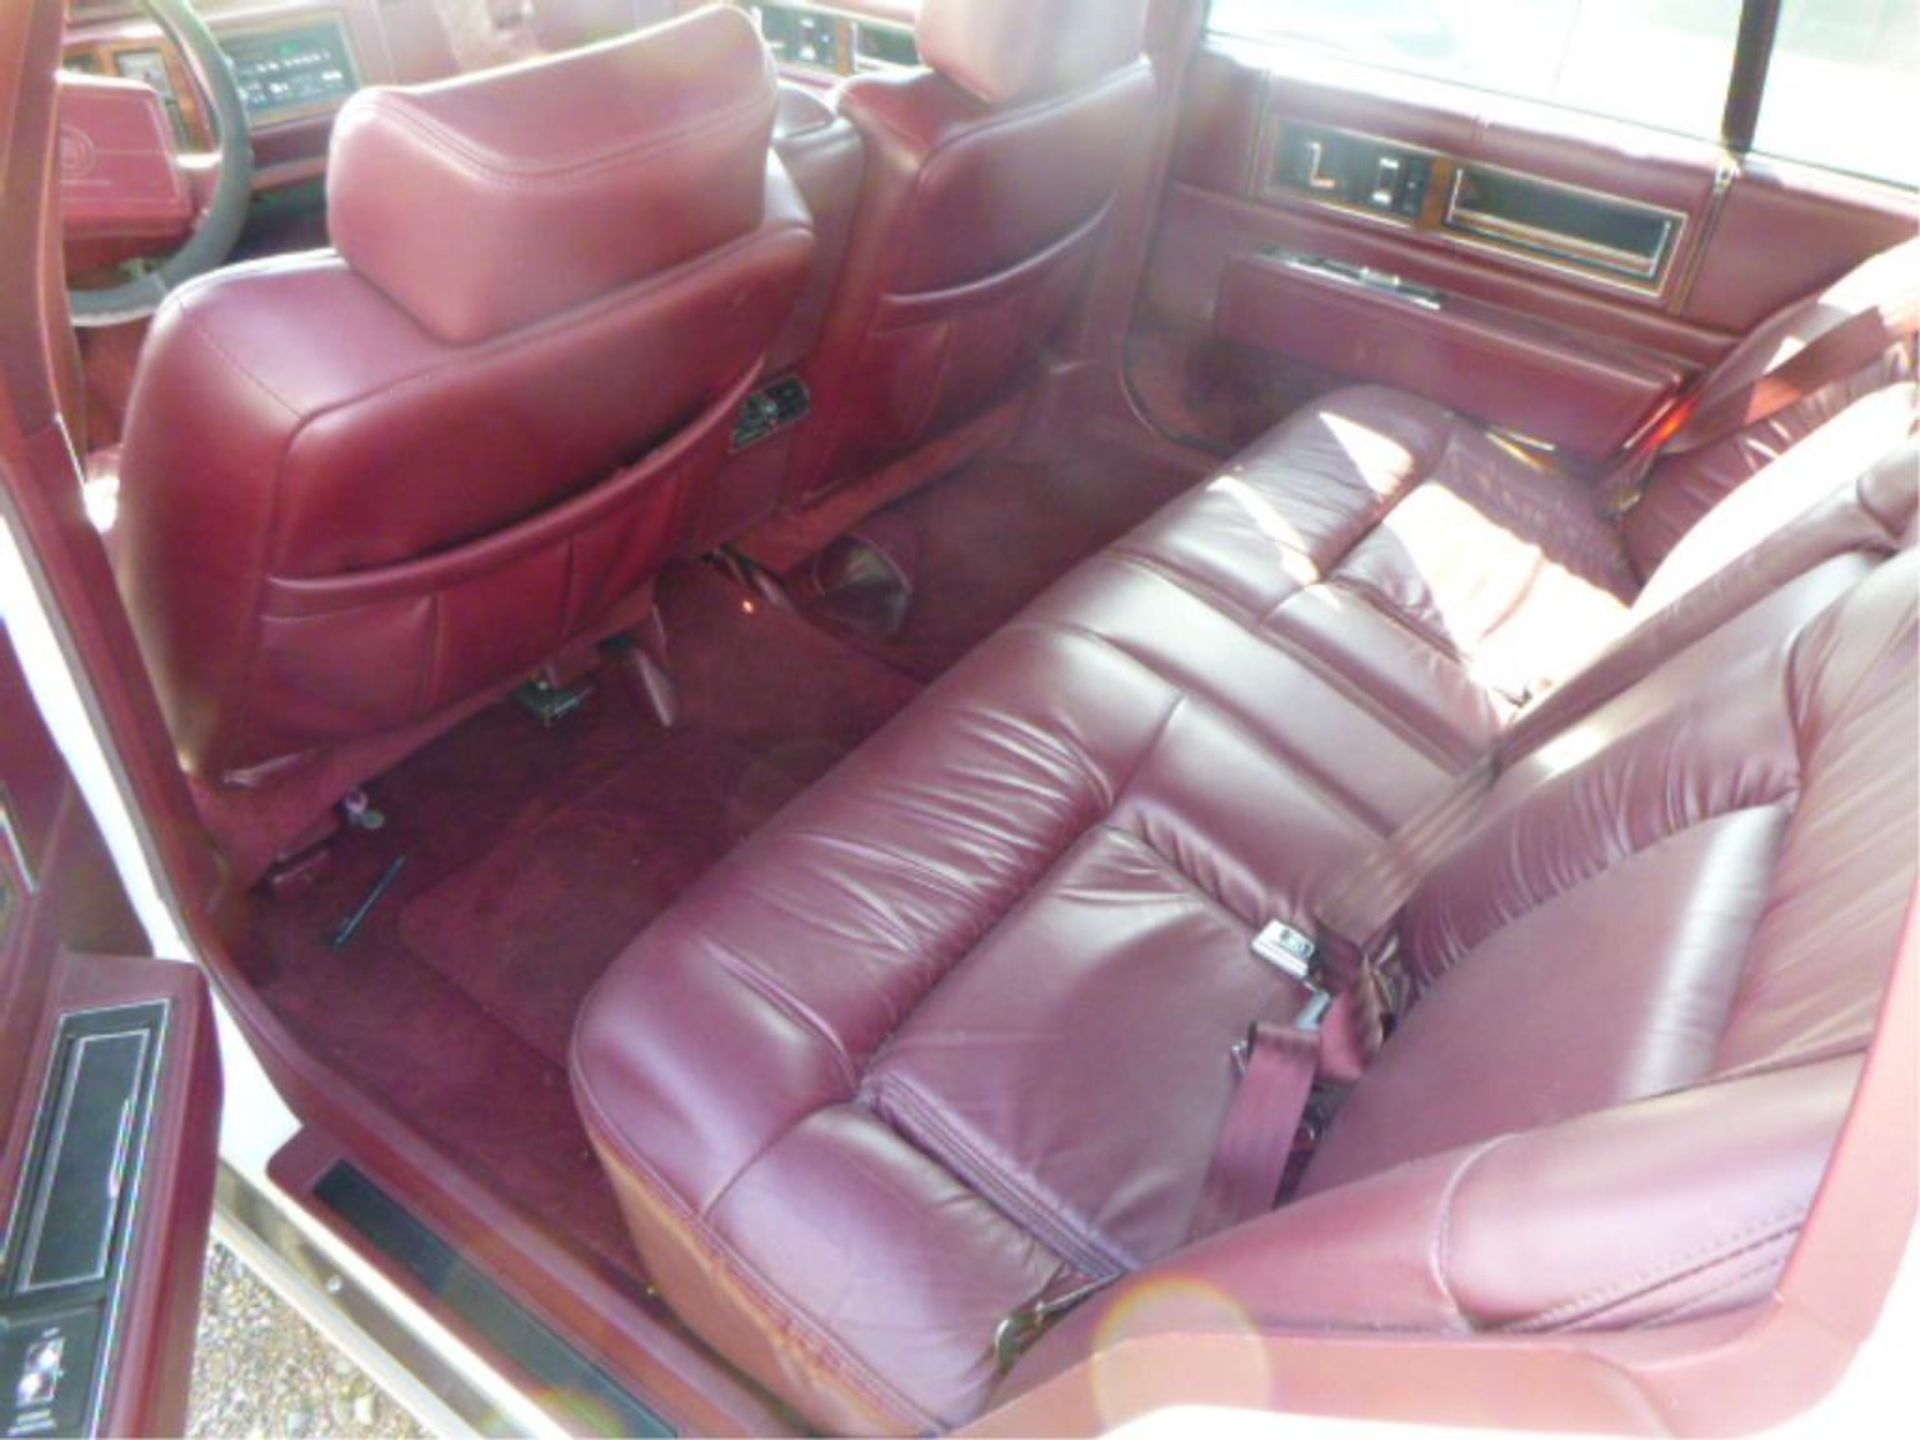 1992 Cadillac Deville - Image 10 of 14